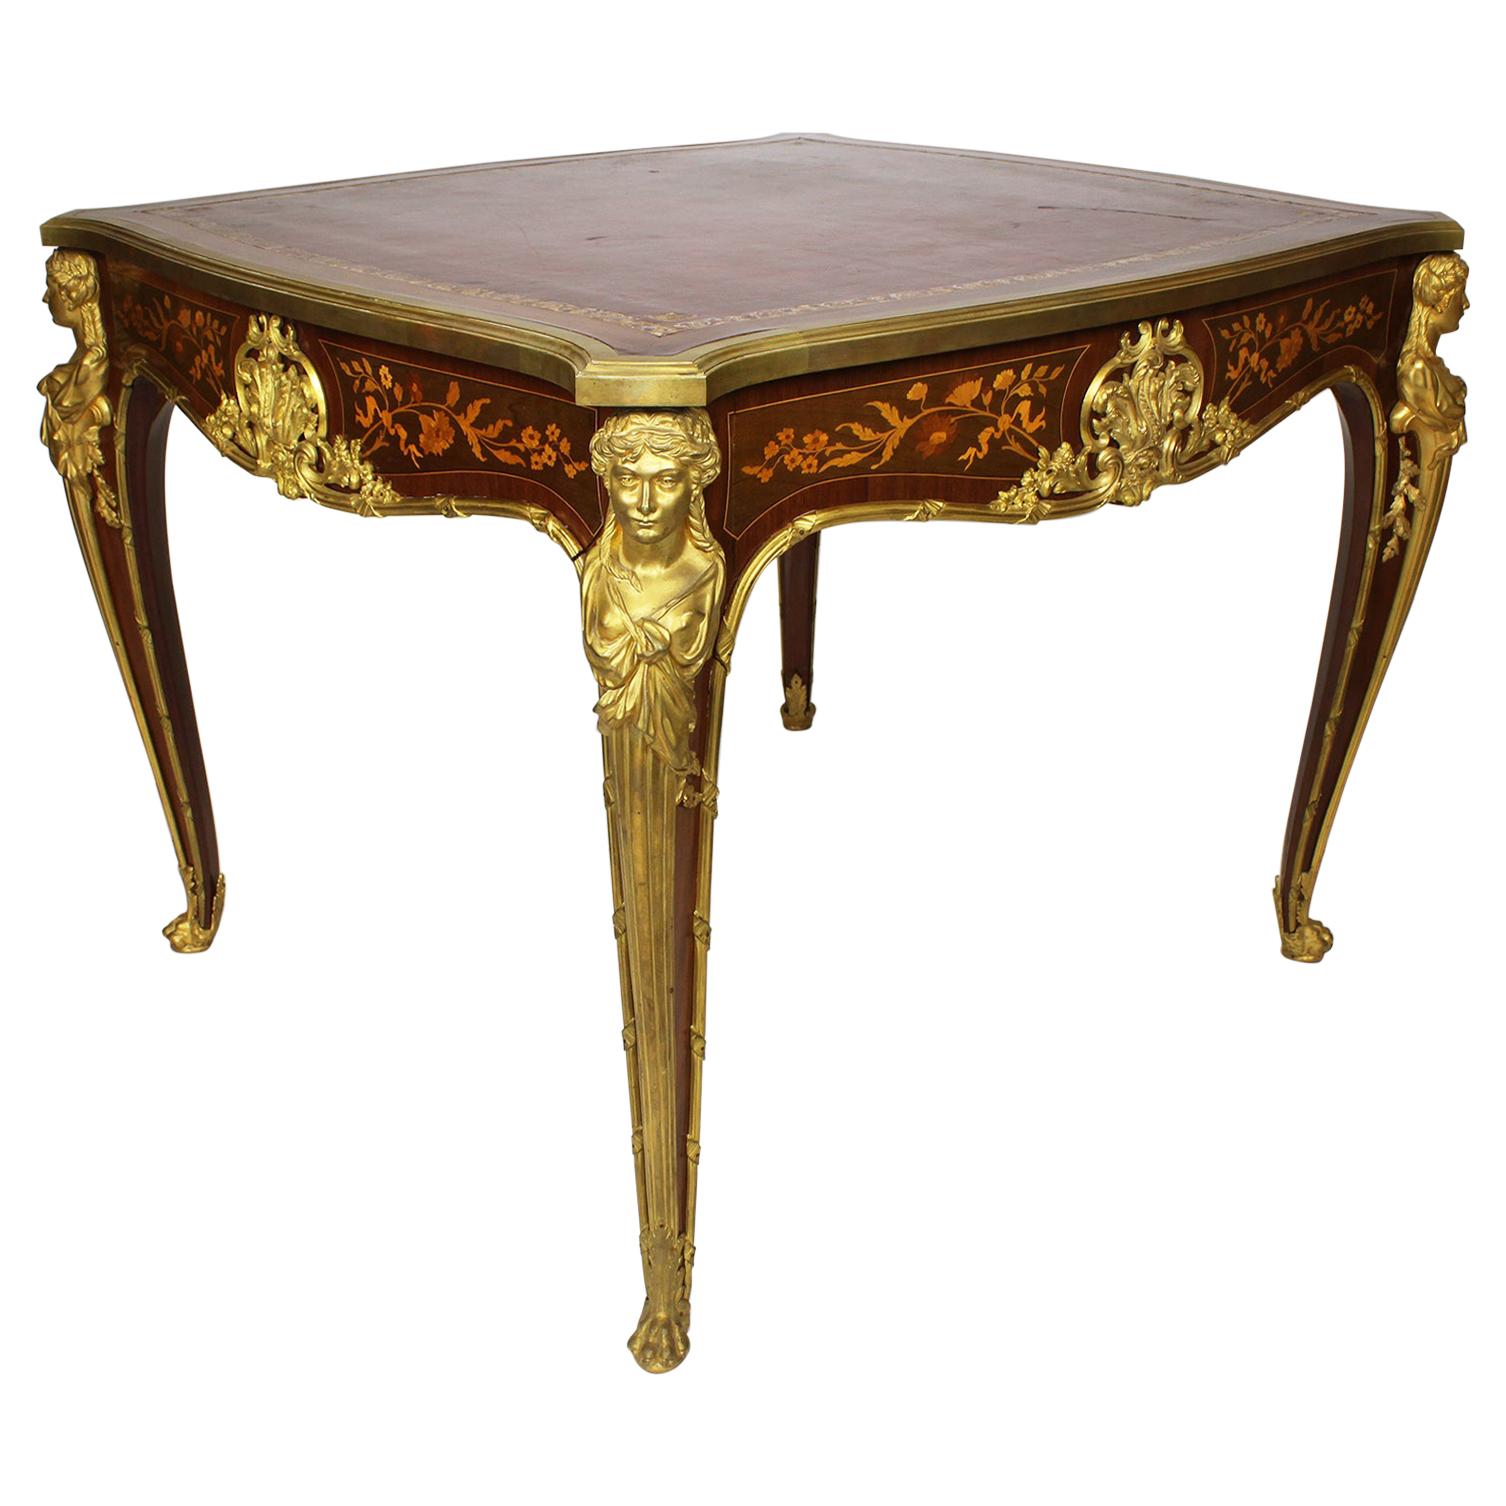 19th-20th Century Louis XV Style Marquetry & Ormolu Game Table Linke Attributed